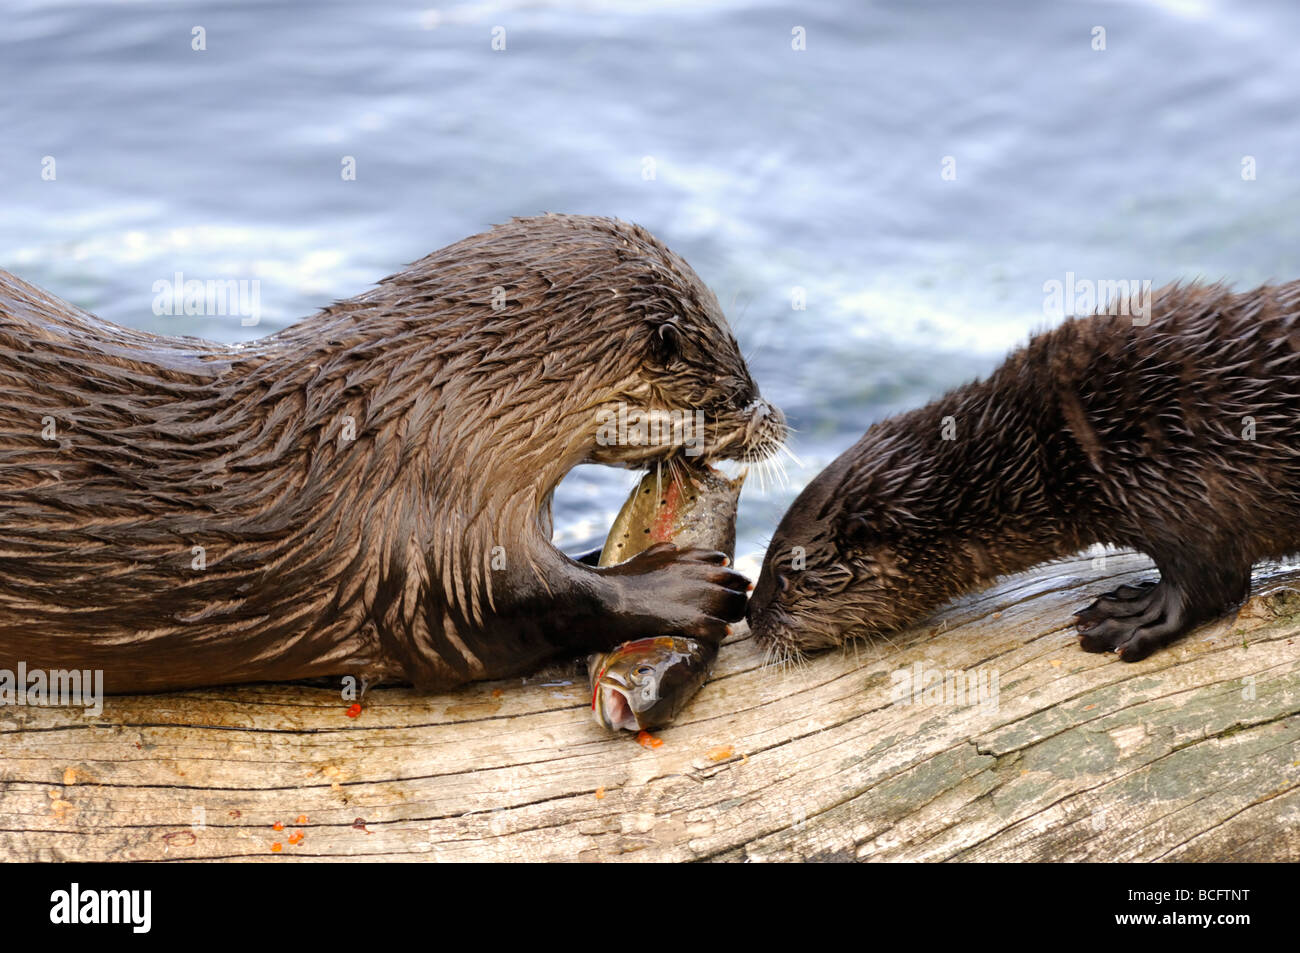 Stock photo of a river otter pup trying to sneak some fish from his mother, Yellowstone National Park, 2009. Stock Photo